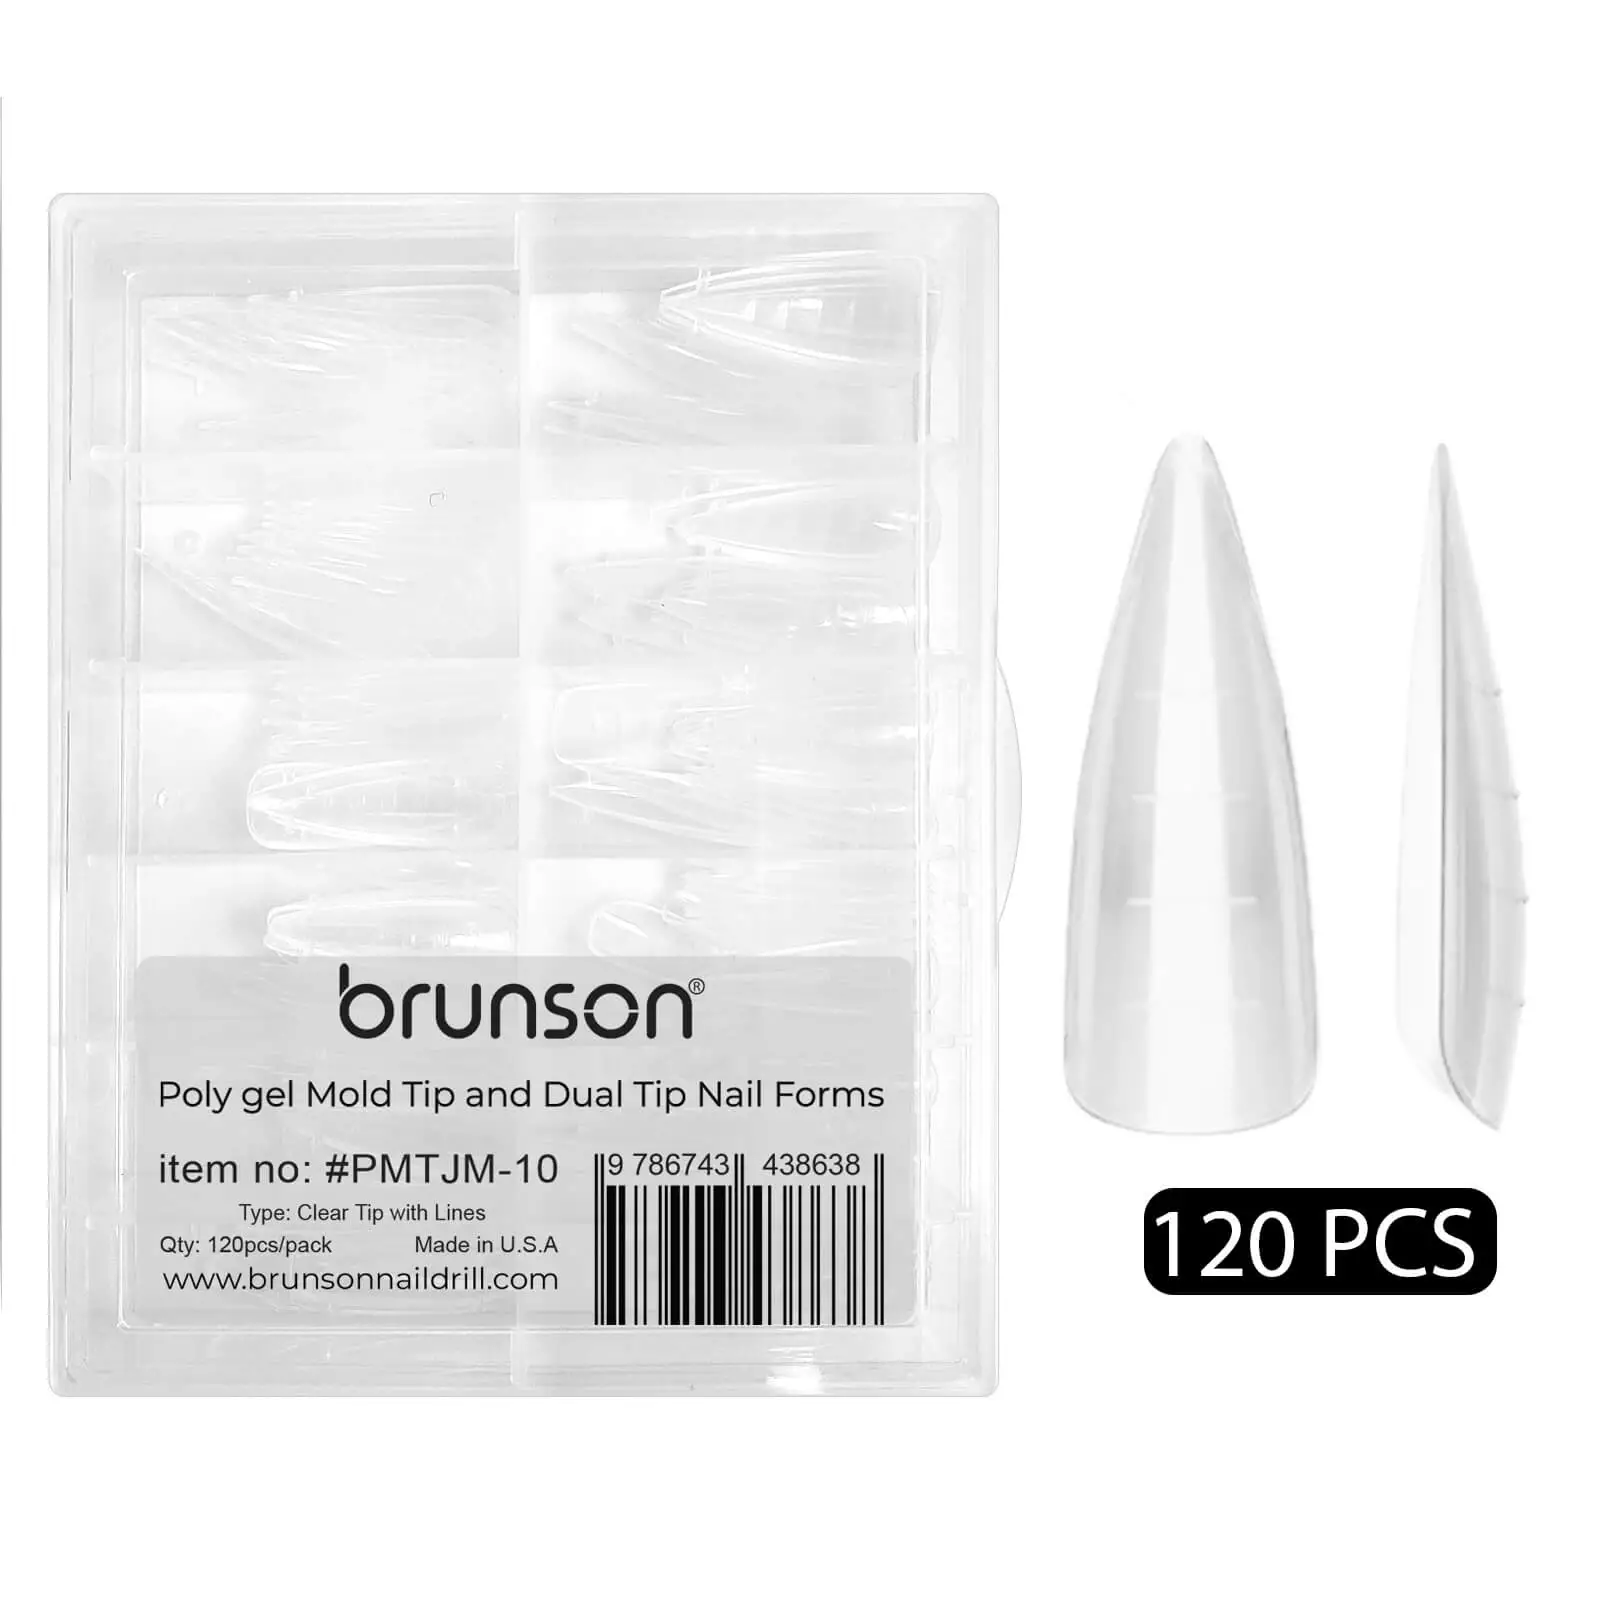 Poly-Gel-Mold-Tip-and-Dual-Tip-Nail-Forms-PMTJM-10-Brunson-1